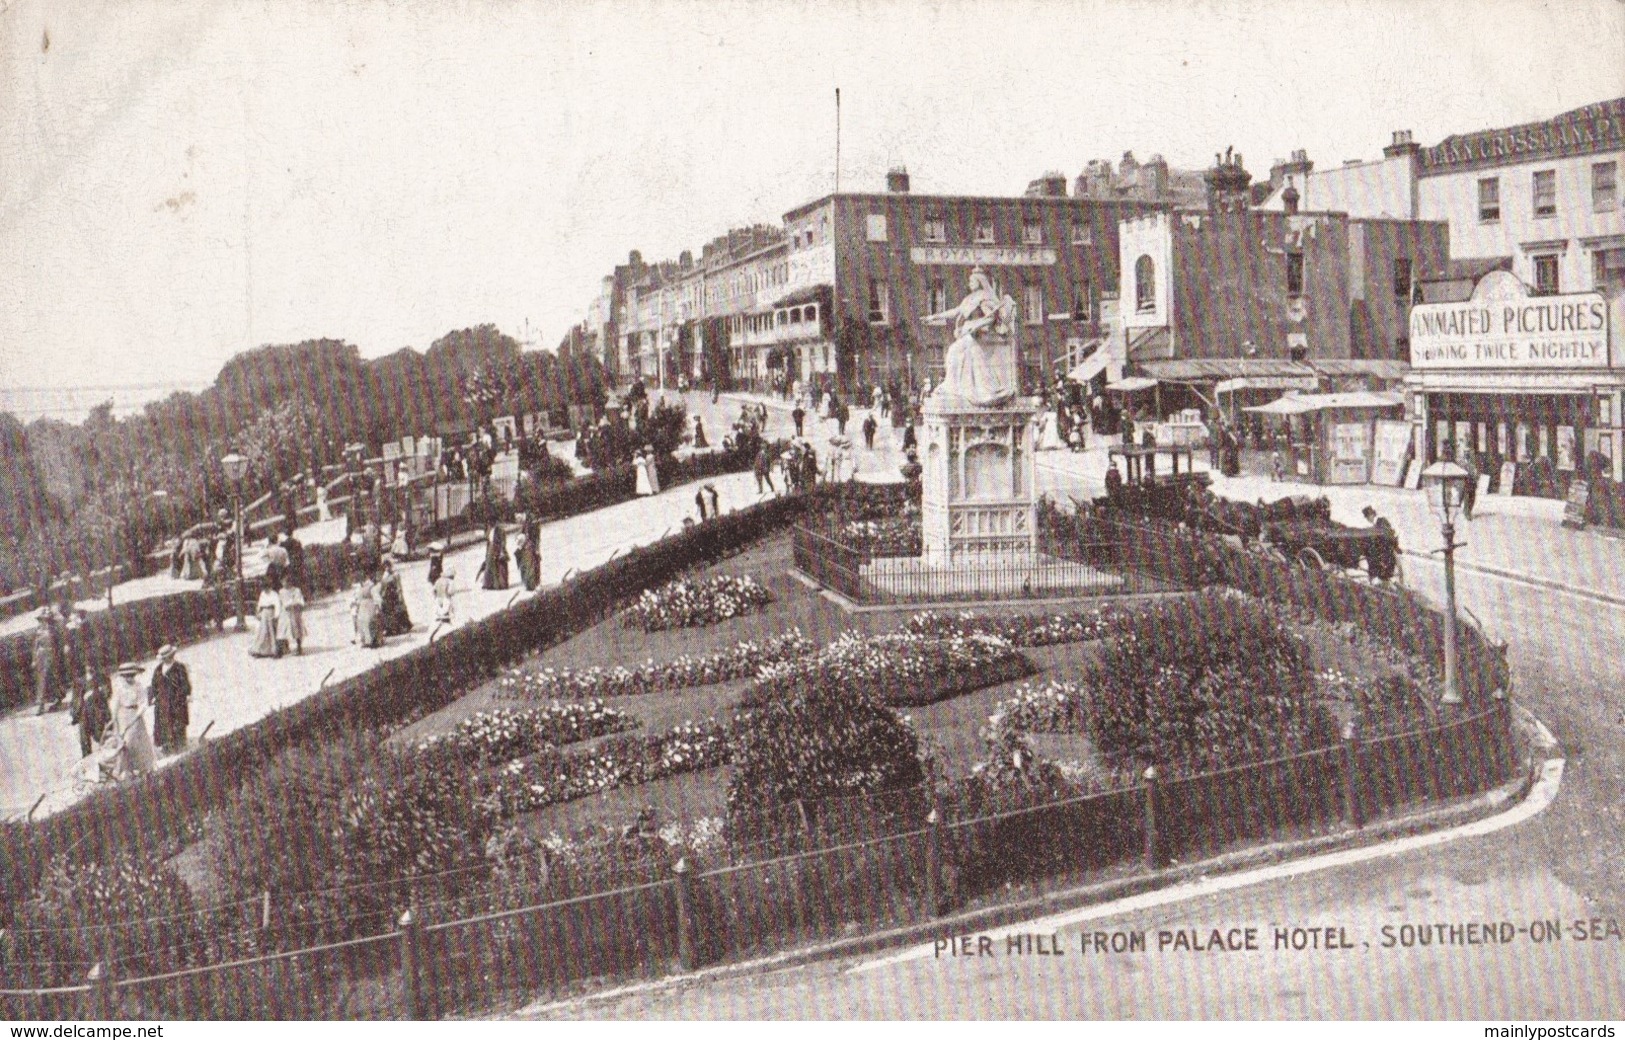 AO50 Pier Hill From Palace Hotel, Southend On Sea - Southend, Westcliff & Leigh